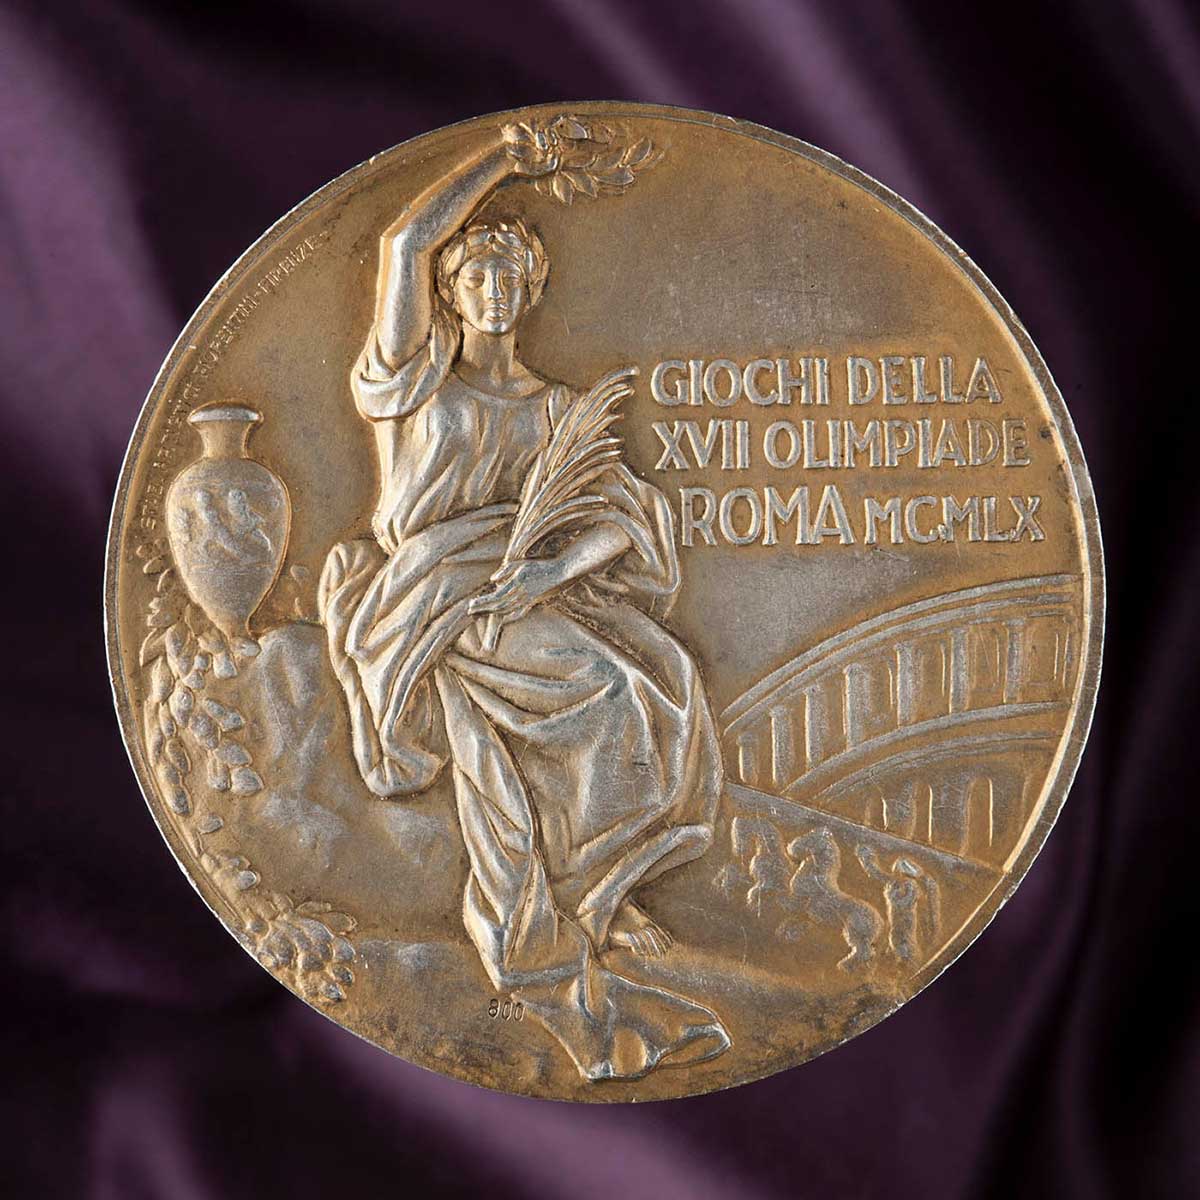 Yellow-coloured circular medal with a classical image showing a woman dressed in a robe, sitting cradling a small branch in her right arm and holding a laurel above her head with her left. An urn apears to her left and part of an arched bridge to her right. The medal has been inscribed with the text 'GIOCHI DELLA / XVII OLIMPIADE / ROMA MCMLX'.